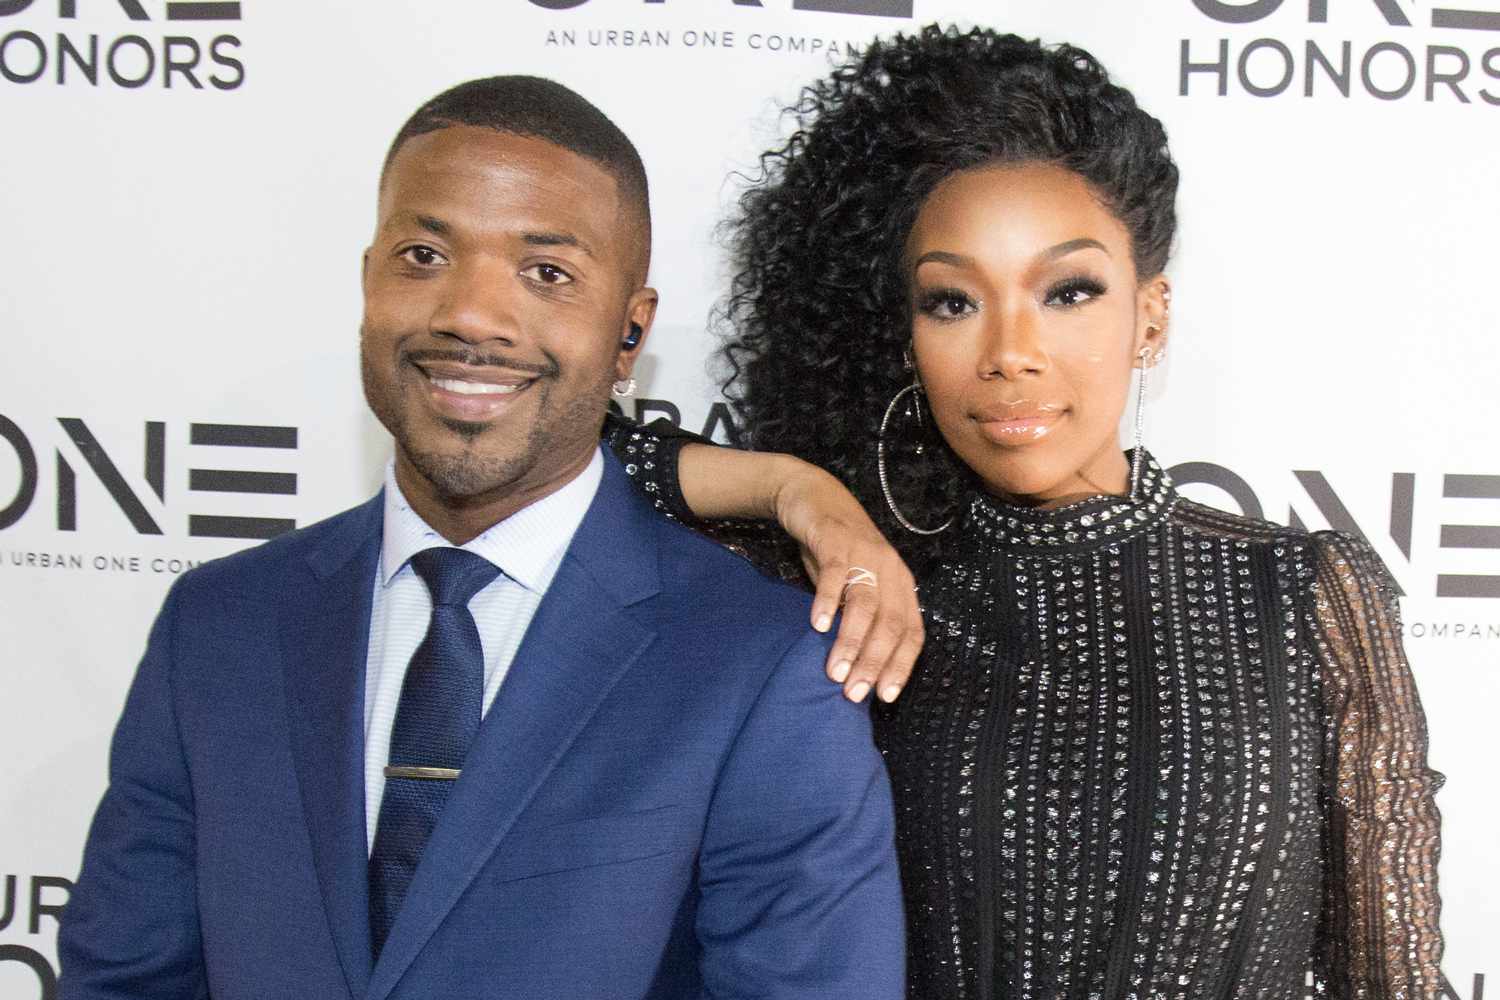 Ray J Says He and Brandy 'Never' Had 'Sibling Rivalry' Growing Up: 'I Never Wanted to Work That Hard'